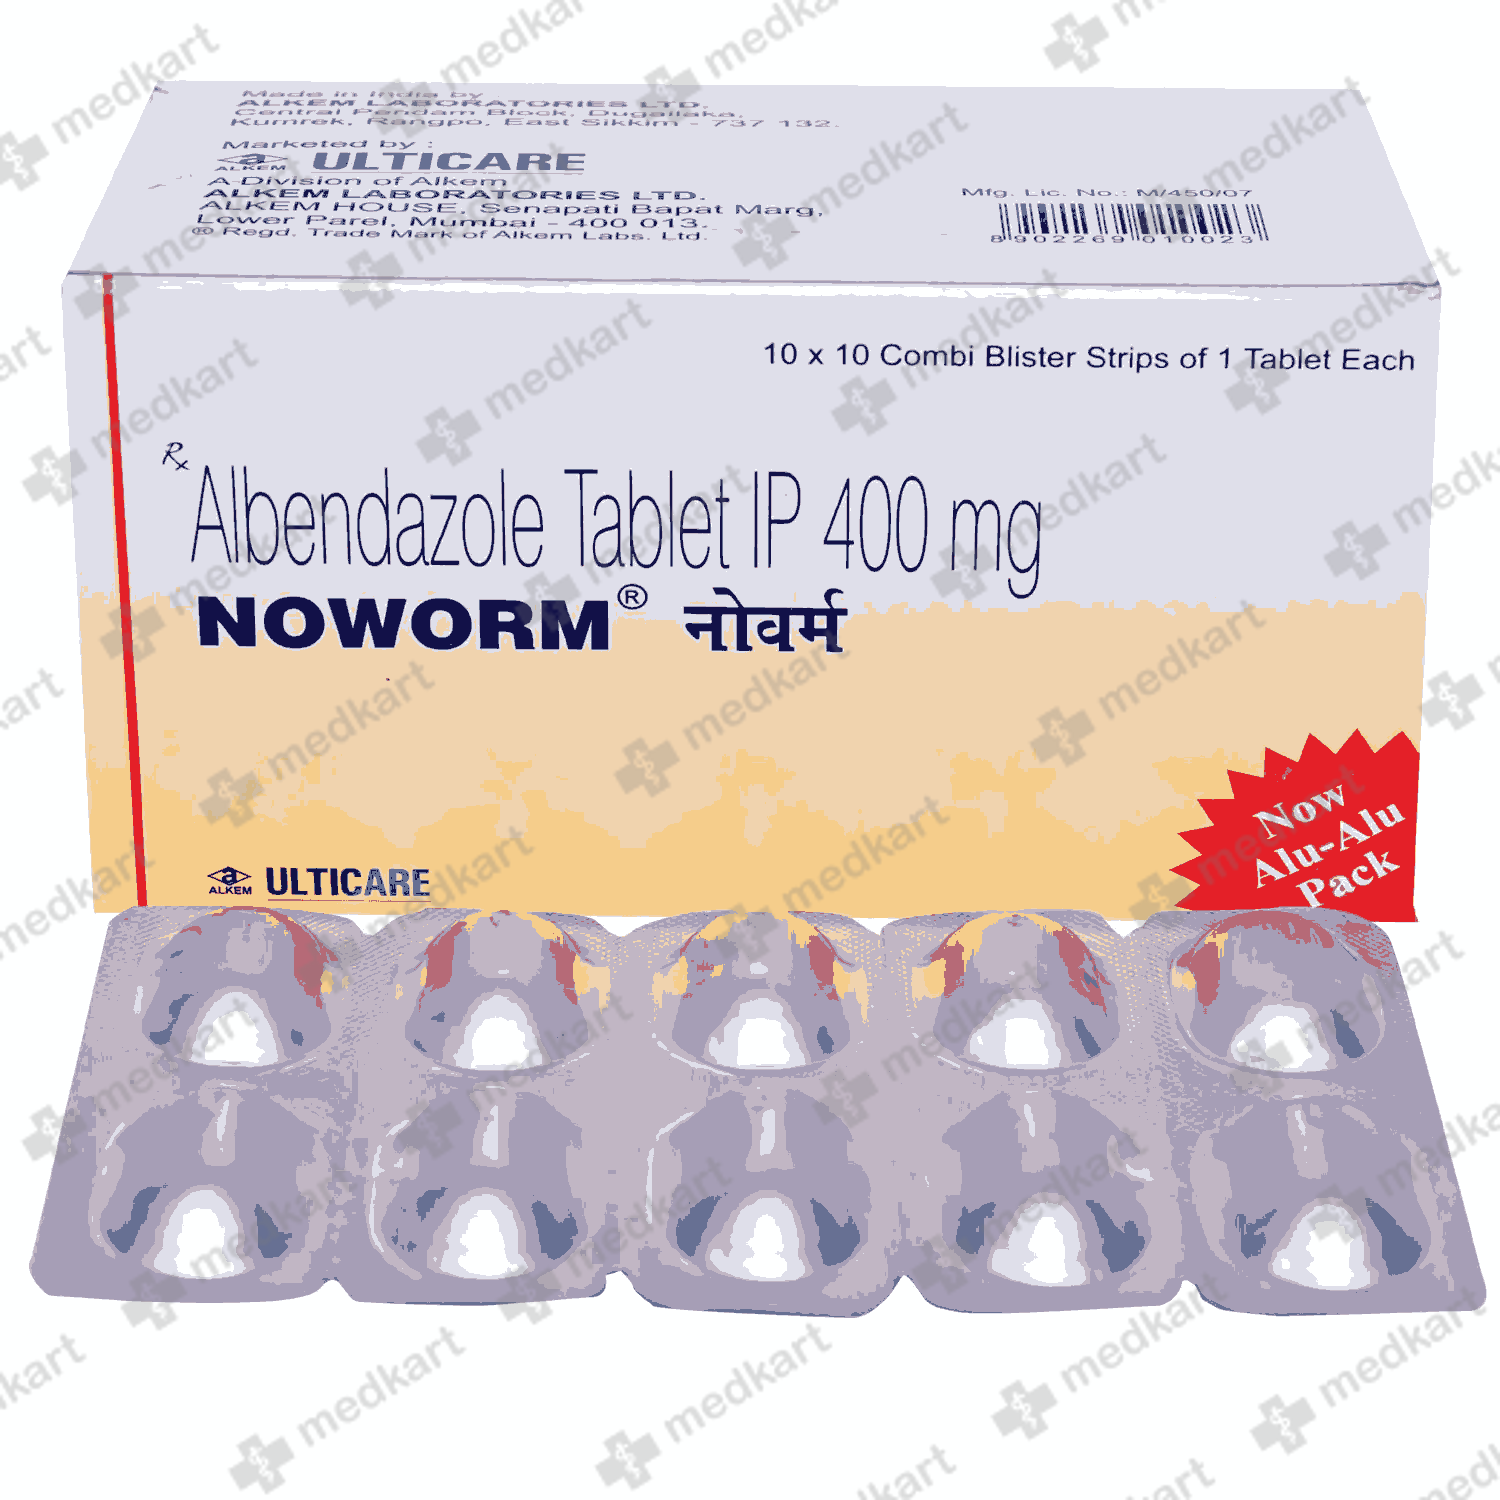 noworm-400mg-tablet-1s